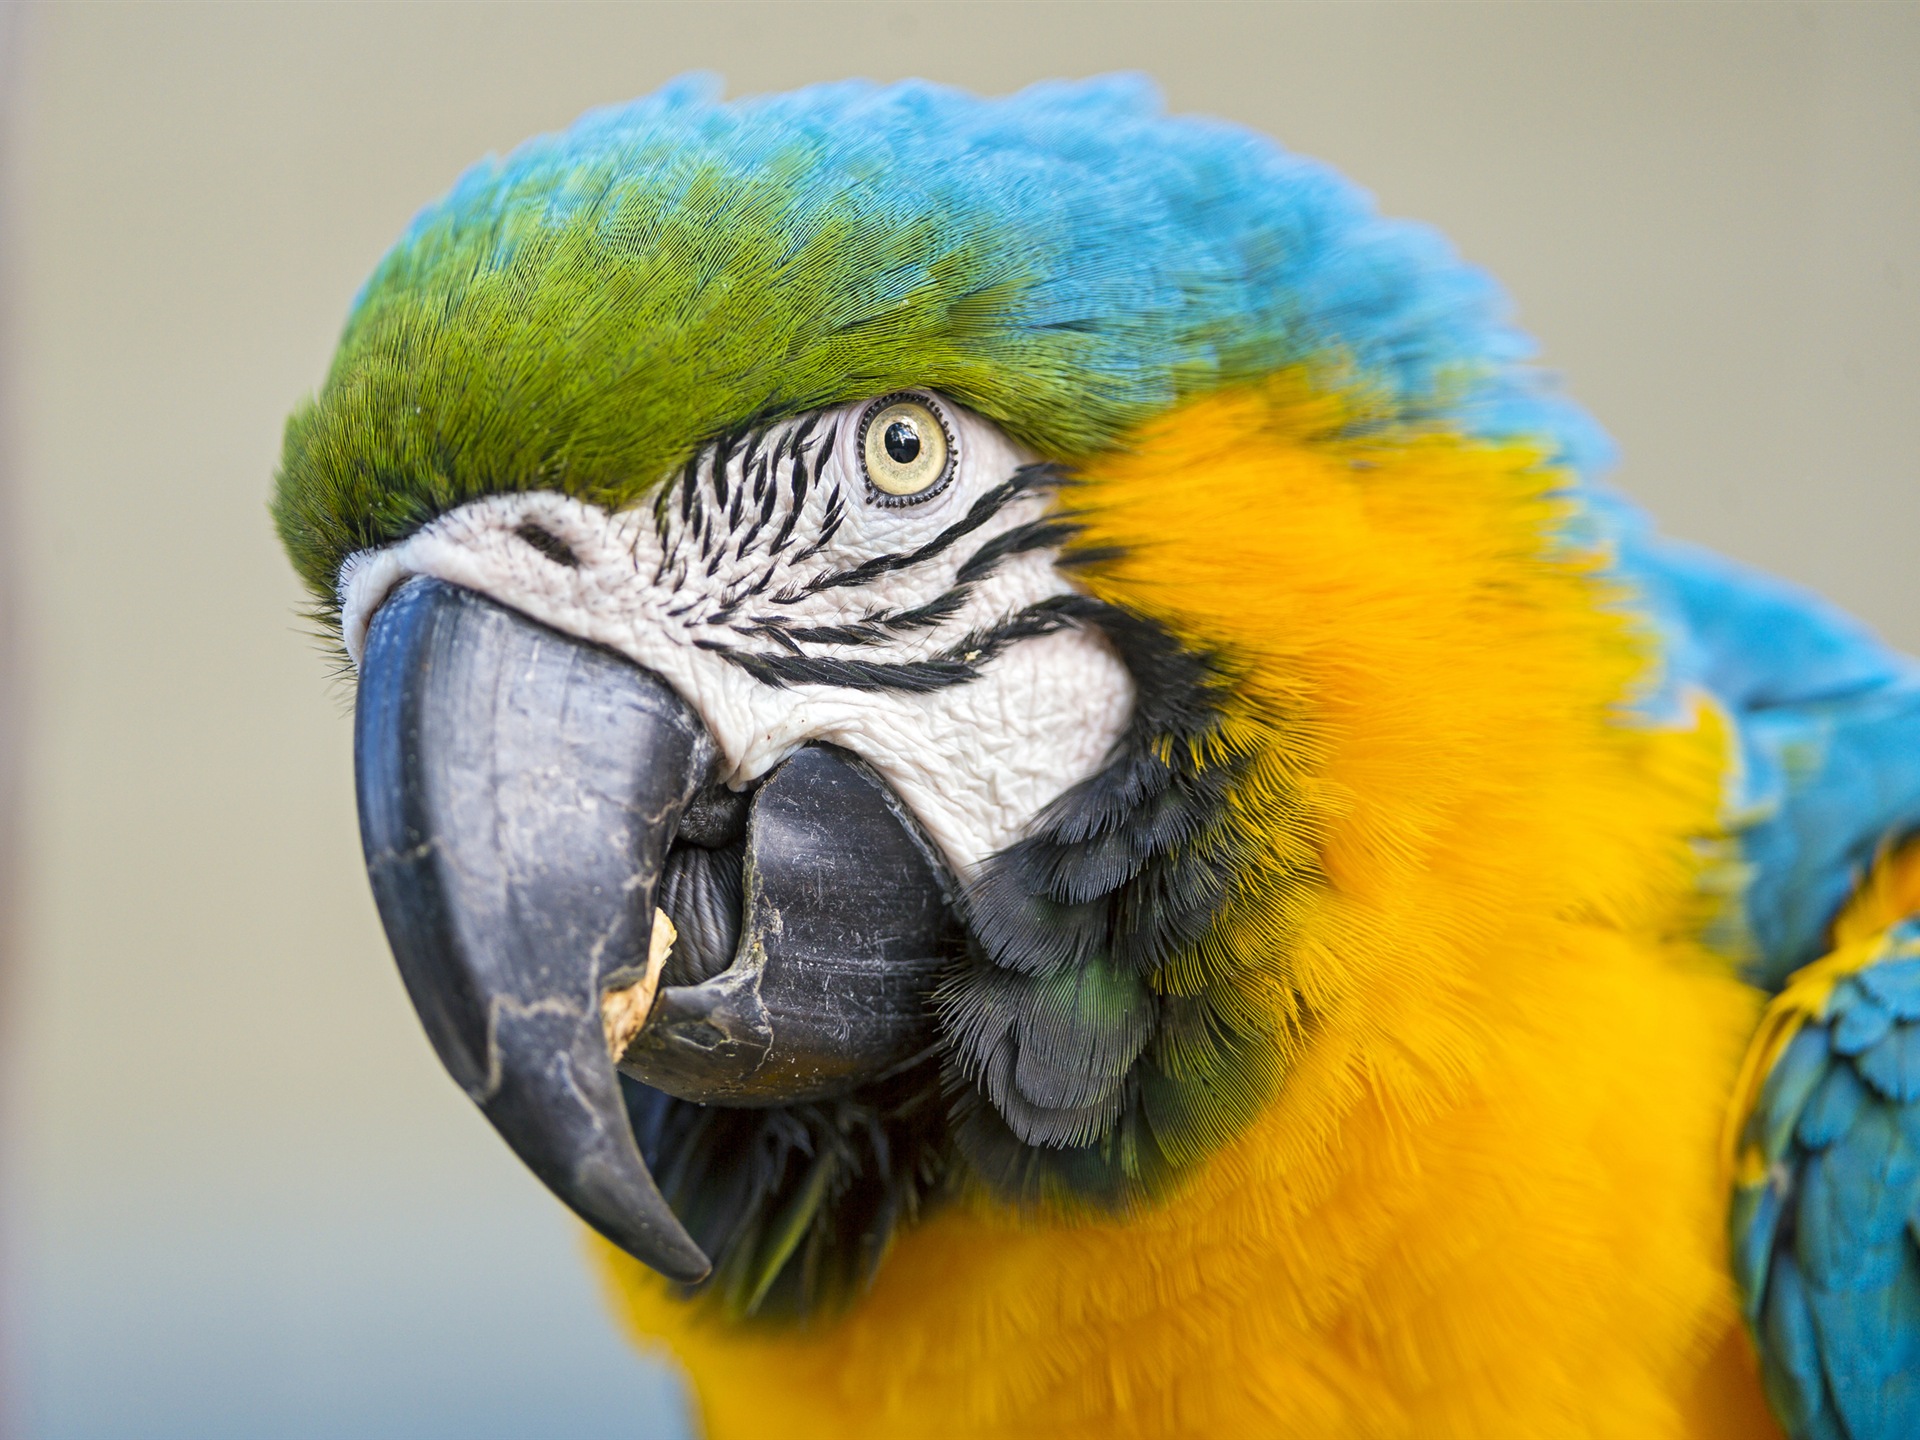 Macaw close-up HD wallpapers #15 - 1920x1440